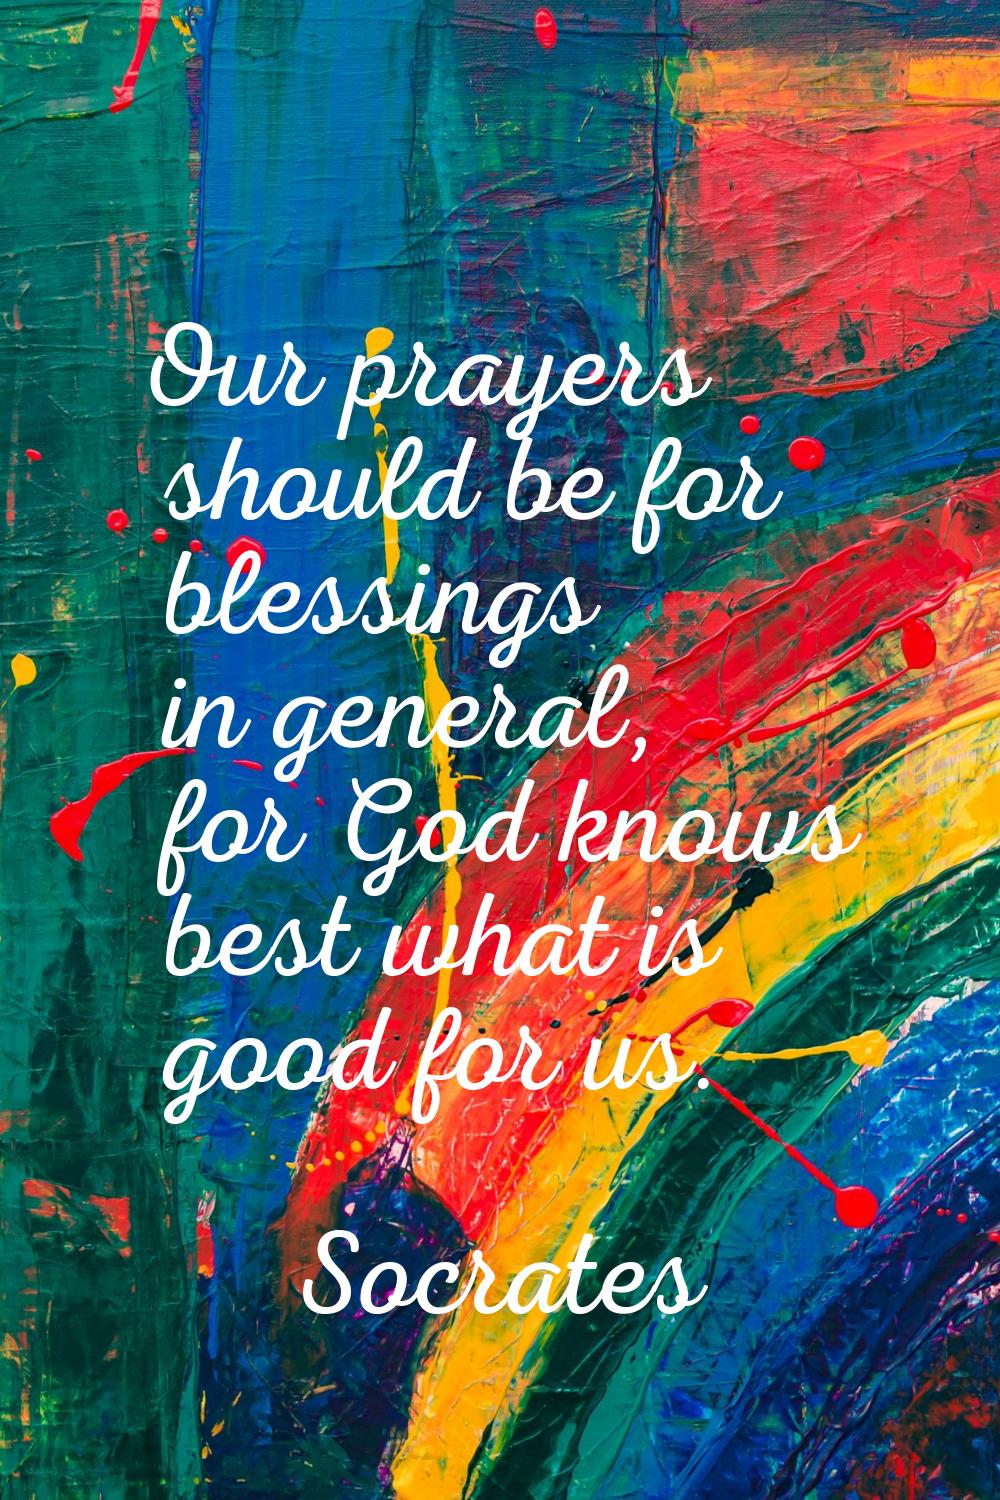 Our prayers should be for blessings in general, for God knows best what is good for us.